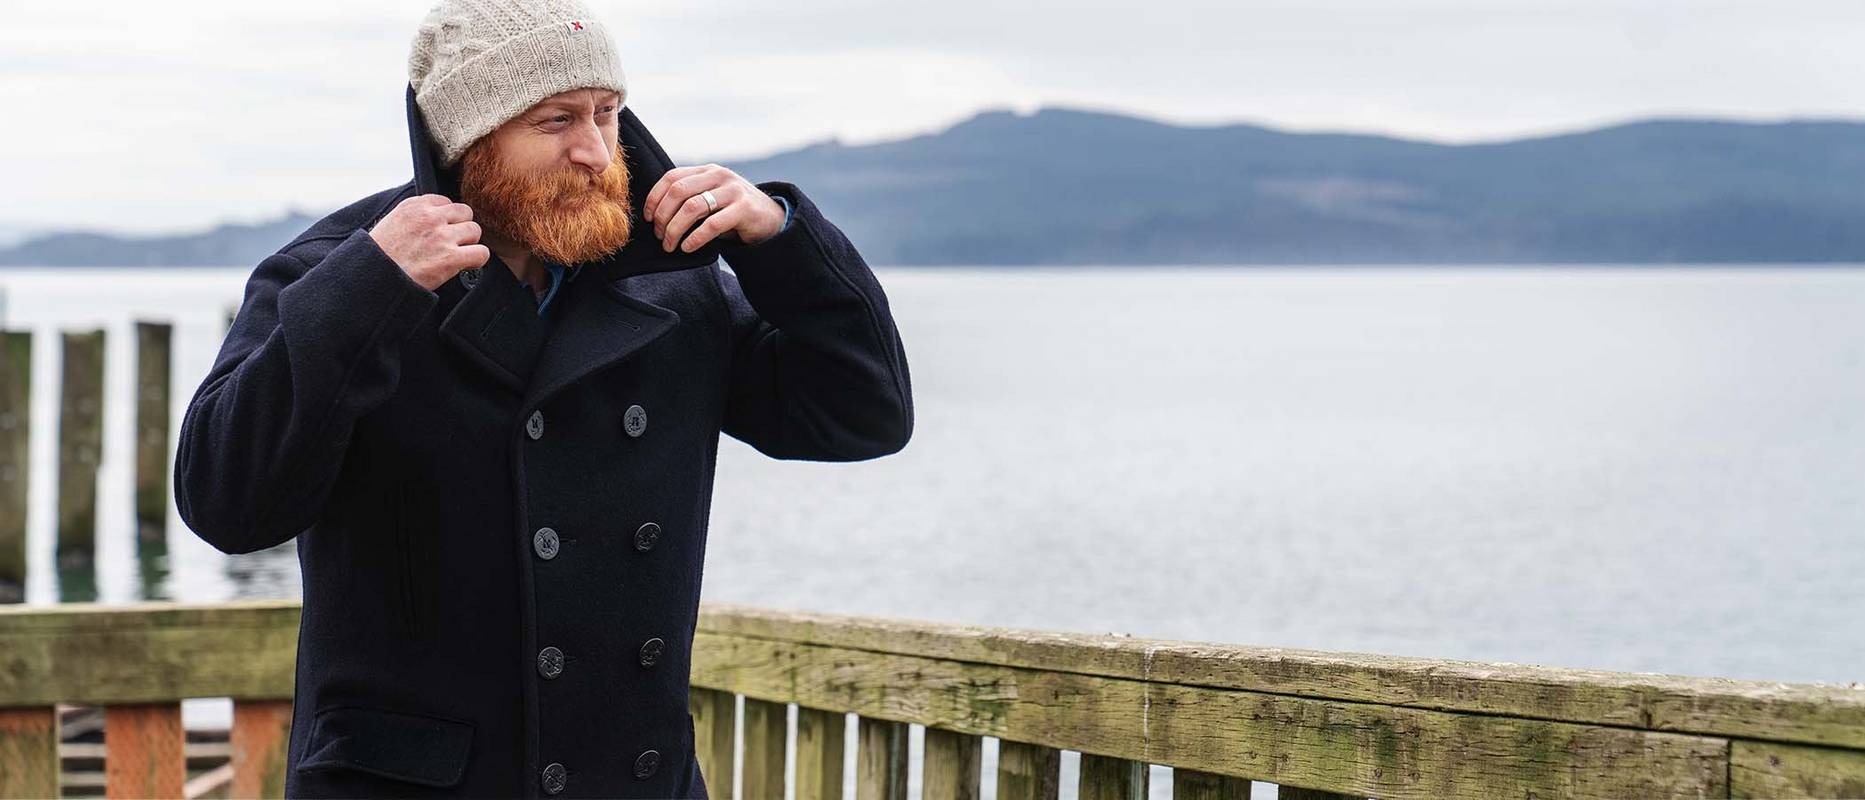 Man with red beard stands on a dock in a pea coat and winter hat